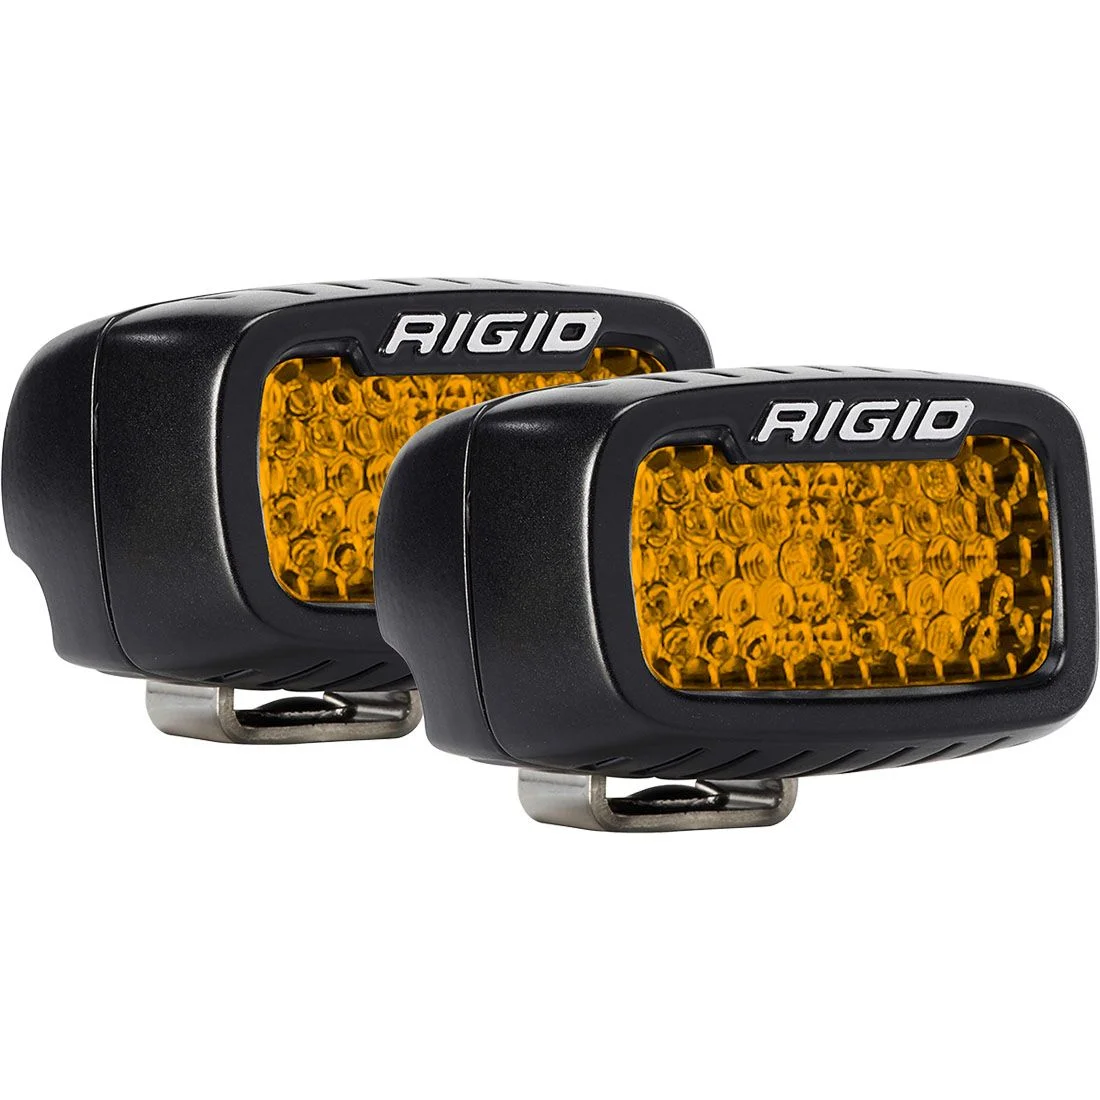 (Discontinued) Rigid SR-M Series REAR FACING Diffused Surface Mount Light Pairs